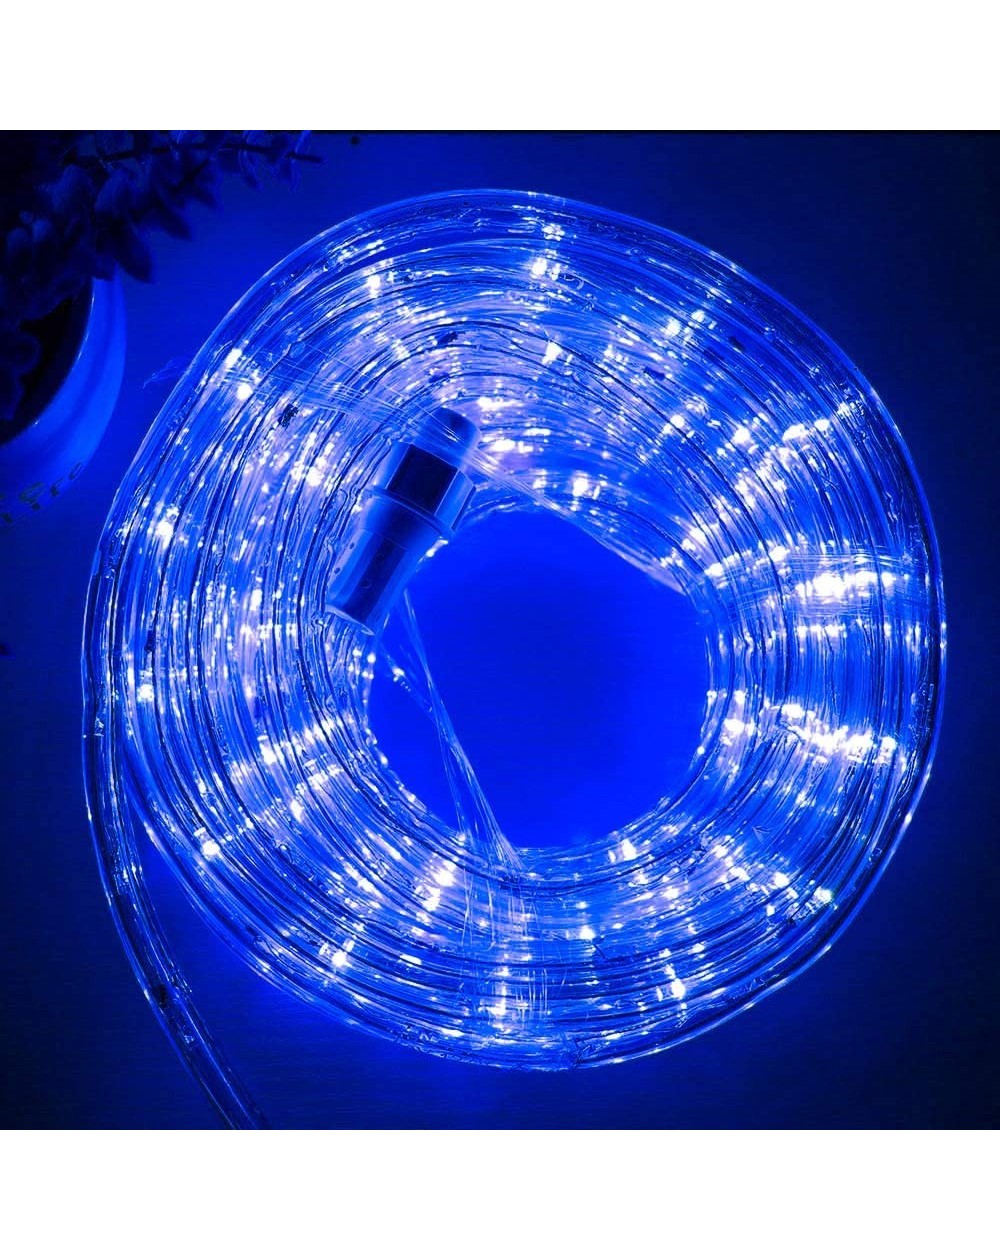 Rope Lights 33ft LED Rope Lights-110V 2 Wire Connectable Christmas Rope Lights Outdoor-240 LED Waterproof Indoor Outdoor Blue...